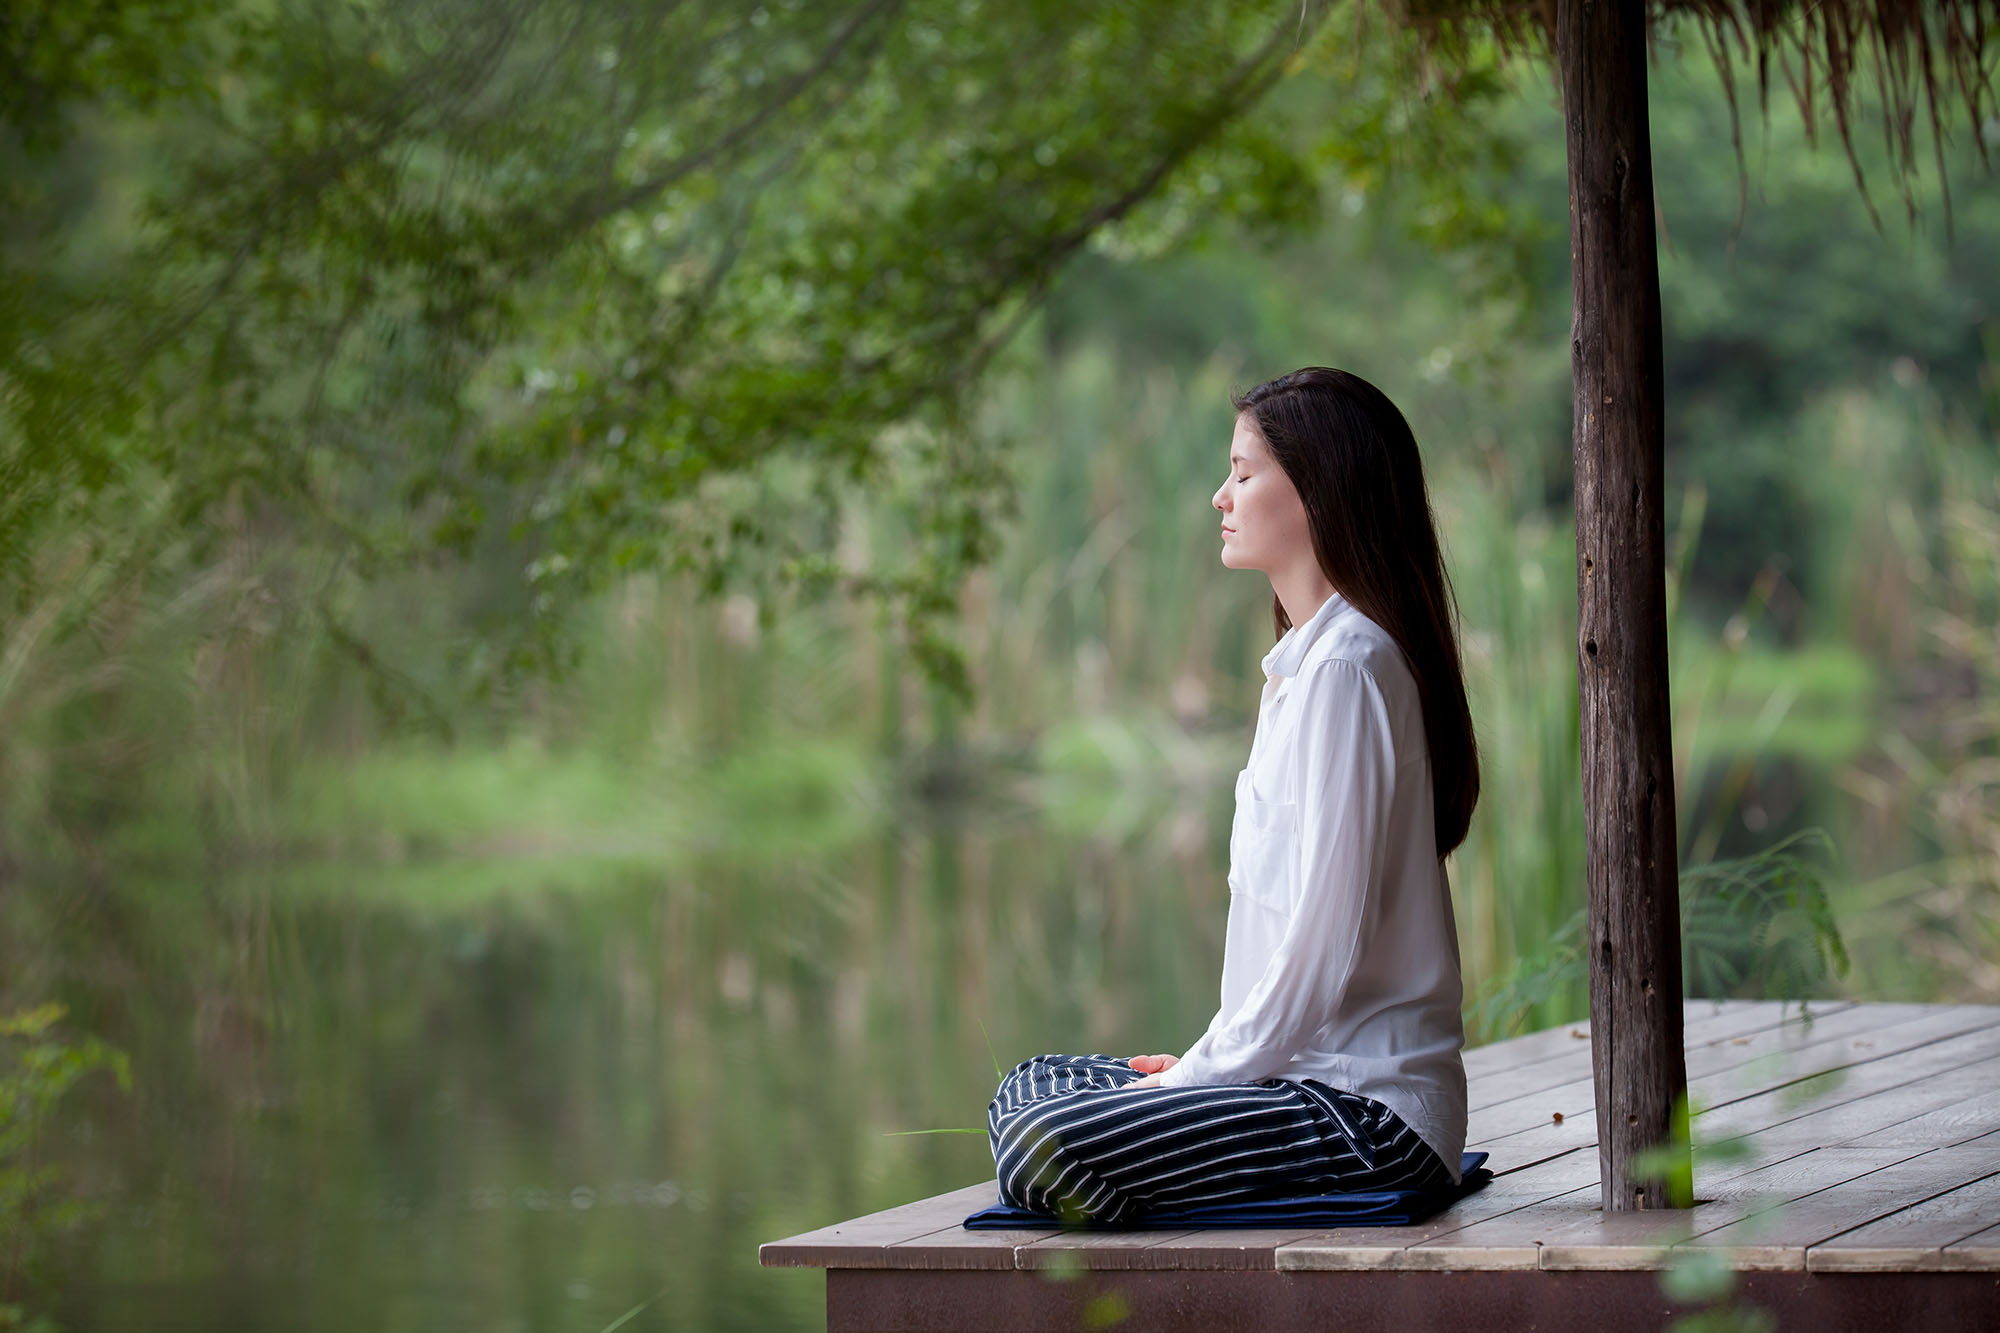 A woman sits on a small porch by the water, legs crossed, the green of the world around her meditative and serene as she sits quietly, reflecting.